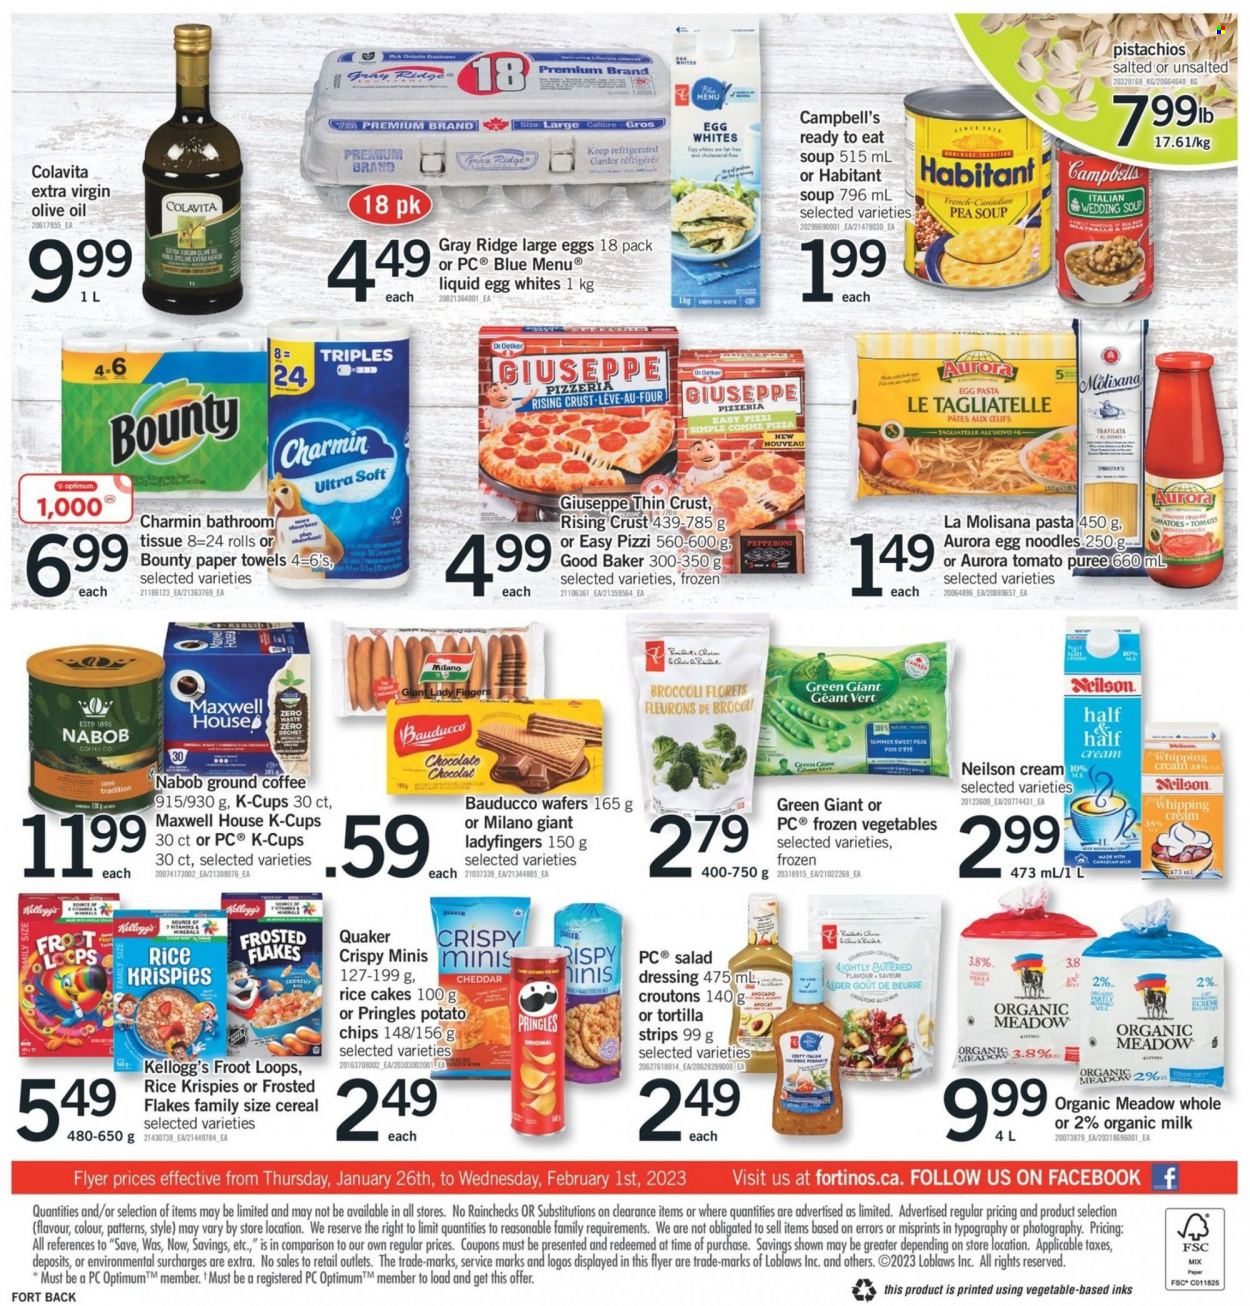 thumbnail - Fortinos Flyer - January 26, 2023 - February 01, 2023 - Sales products - tortillas, broccoli, peas, avocado, Campbell's, pizza, soup, pasta, Quaker, noodles, pepperoni, Dr. Oetker, organic milk, large eggs, whipping cream, frozen vegetables, lady fingers, wafers, chocolate, Bounty, Kellogg's, potato chips, Pringles, croutons, tomato sauce, tomato puree, cereals, Rice Krispies, Frosted Flakes, egg noodles, salad dressing, dressing, extra virgin olive oil, olive oil, oil, pistachios, Maxwell House, coffee, ground coffee, coffee capsules, K-Cups, Half and half, bath tissue, kitchen towels, paper towels, Charmin, Optimum. Page 2.